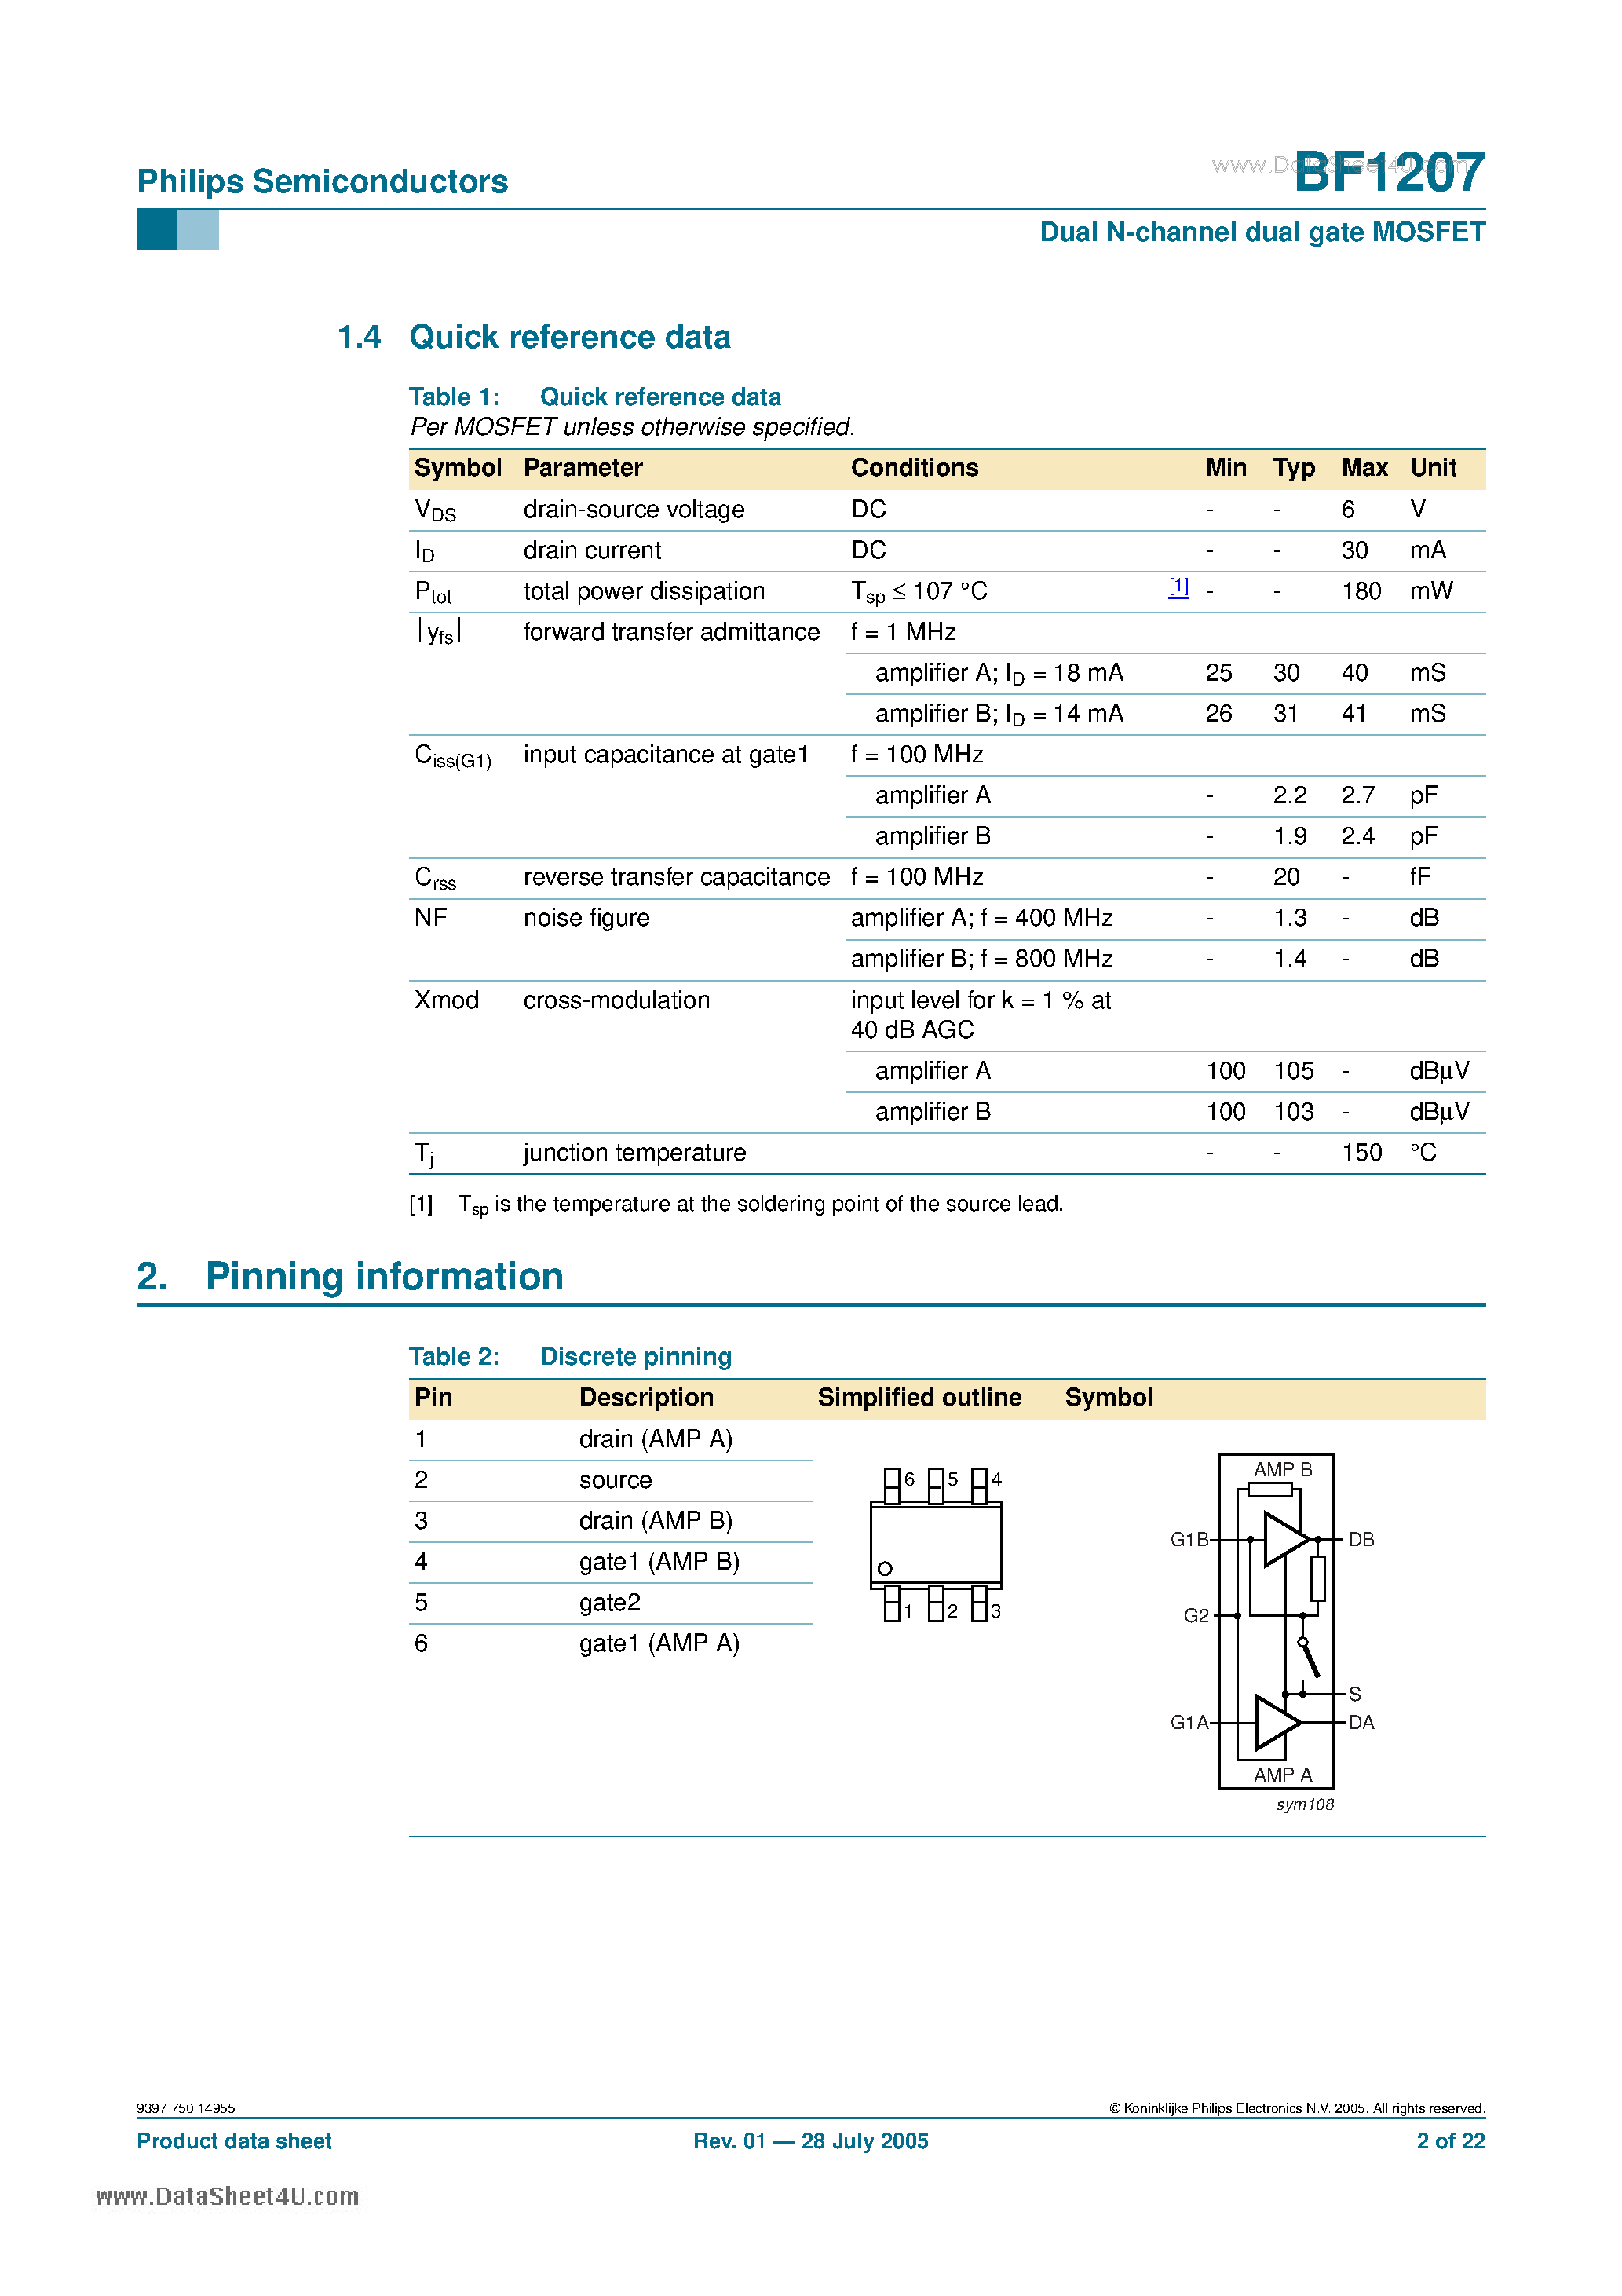 Datasheet BF1207 - Dual N-channel dual gate MOSFET page 2